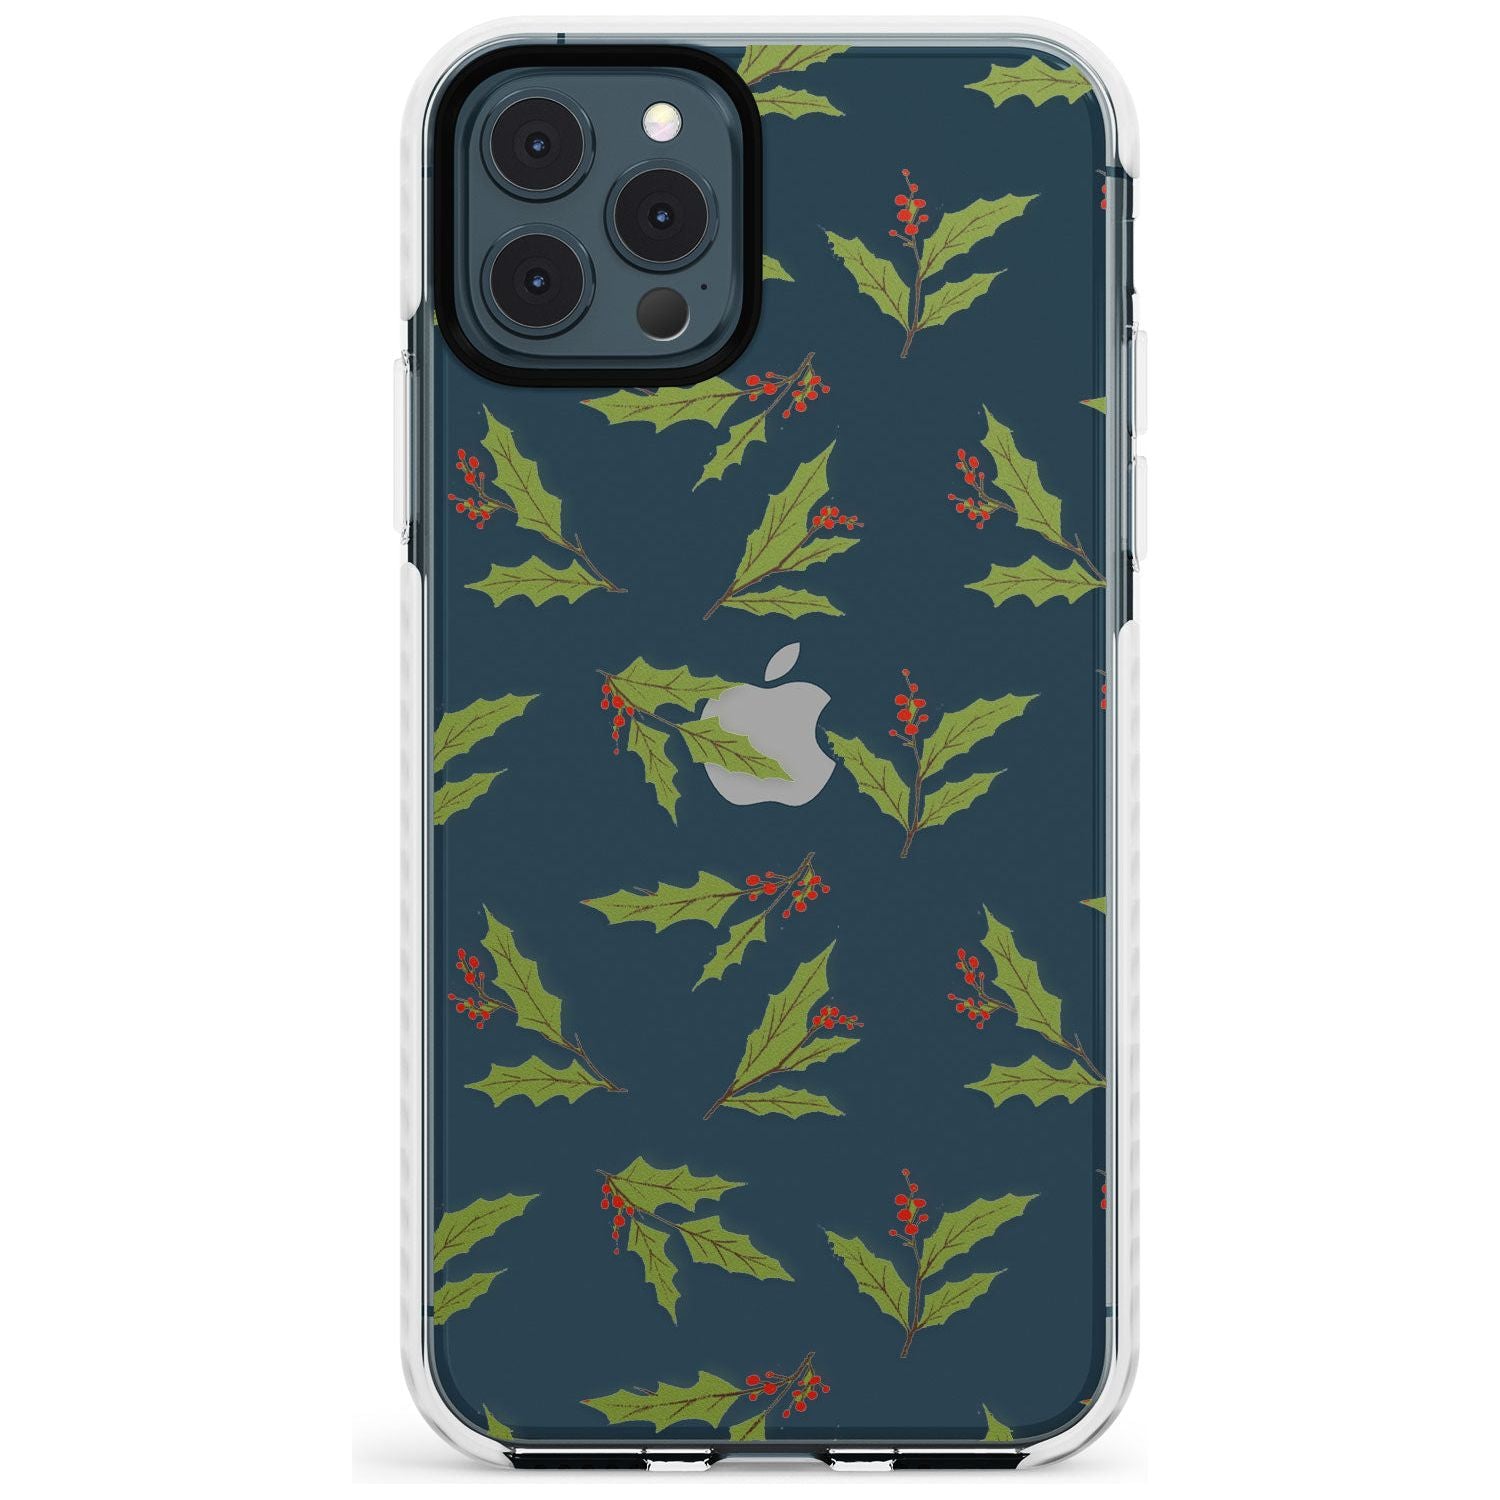 Christmas Holly Pattern Impact Phone Case for iPhone 11 Pro Max